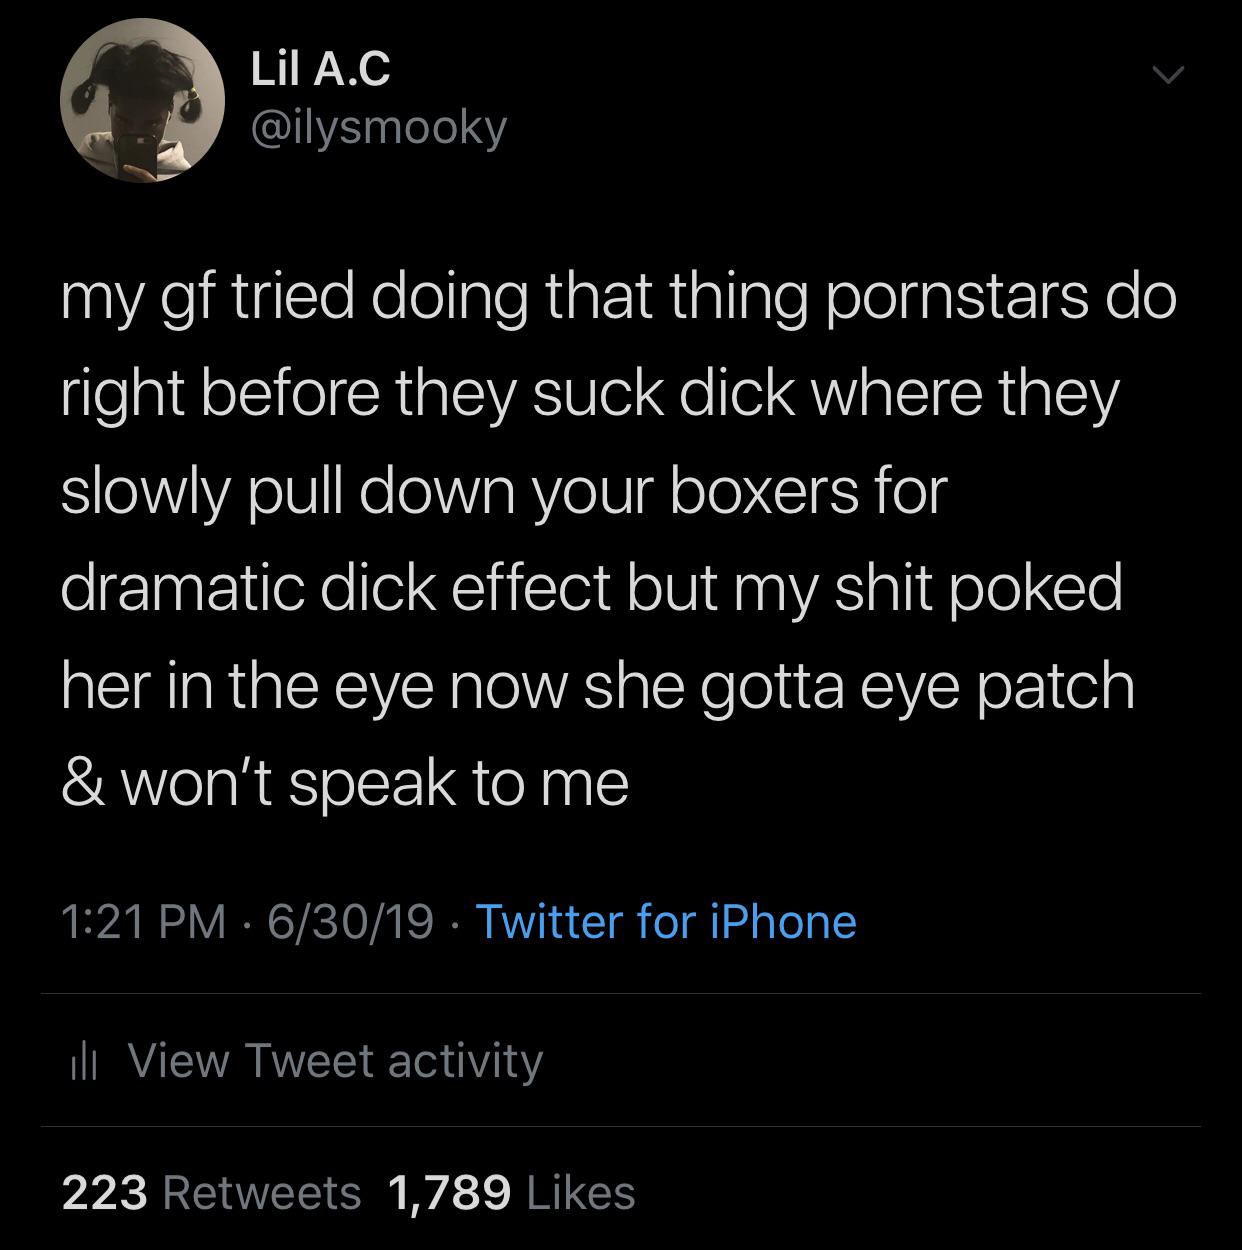 black twitter - my gf tried doing that thing pornstars do right before they suck dick where they slowly pull down your boxers for dramatic dick effect but my shit poked her in the eye now she gotta eye patch & won't speak to me